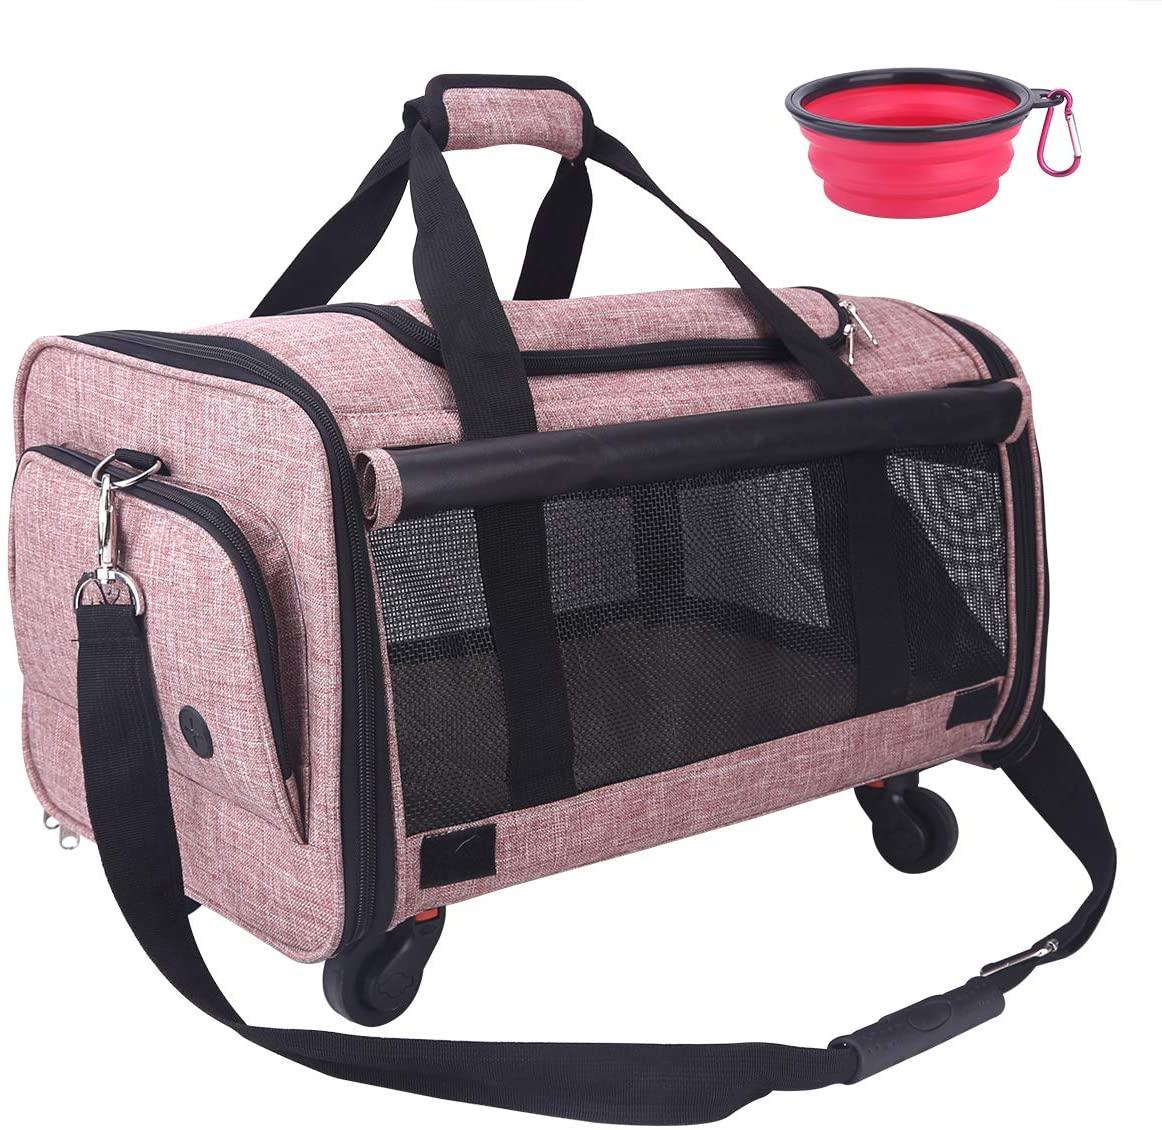 Airline Approved Travel Tote Luggage Soft Sided Pink Cat Dog Pet Carrier With Detachable Wheels For Small And Medium Dogs Cats